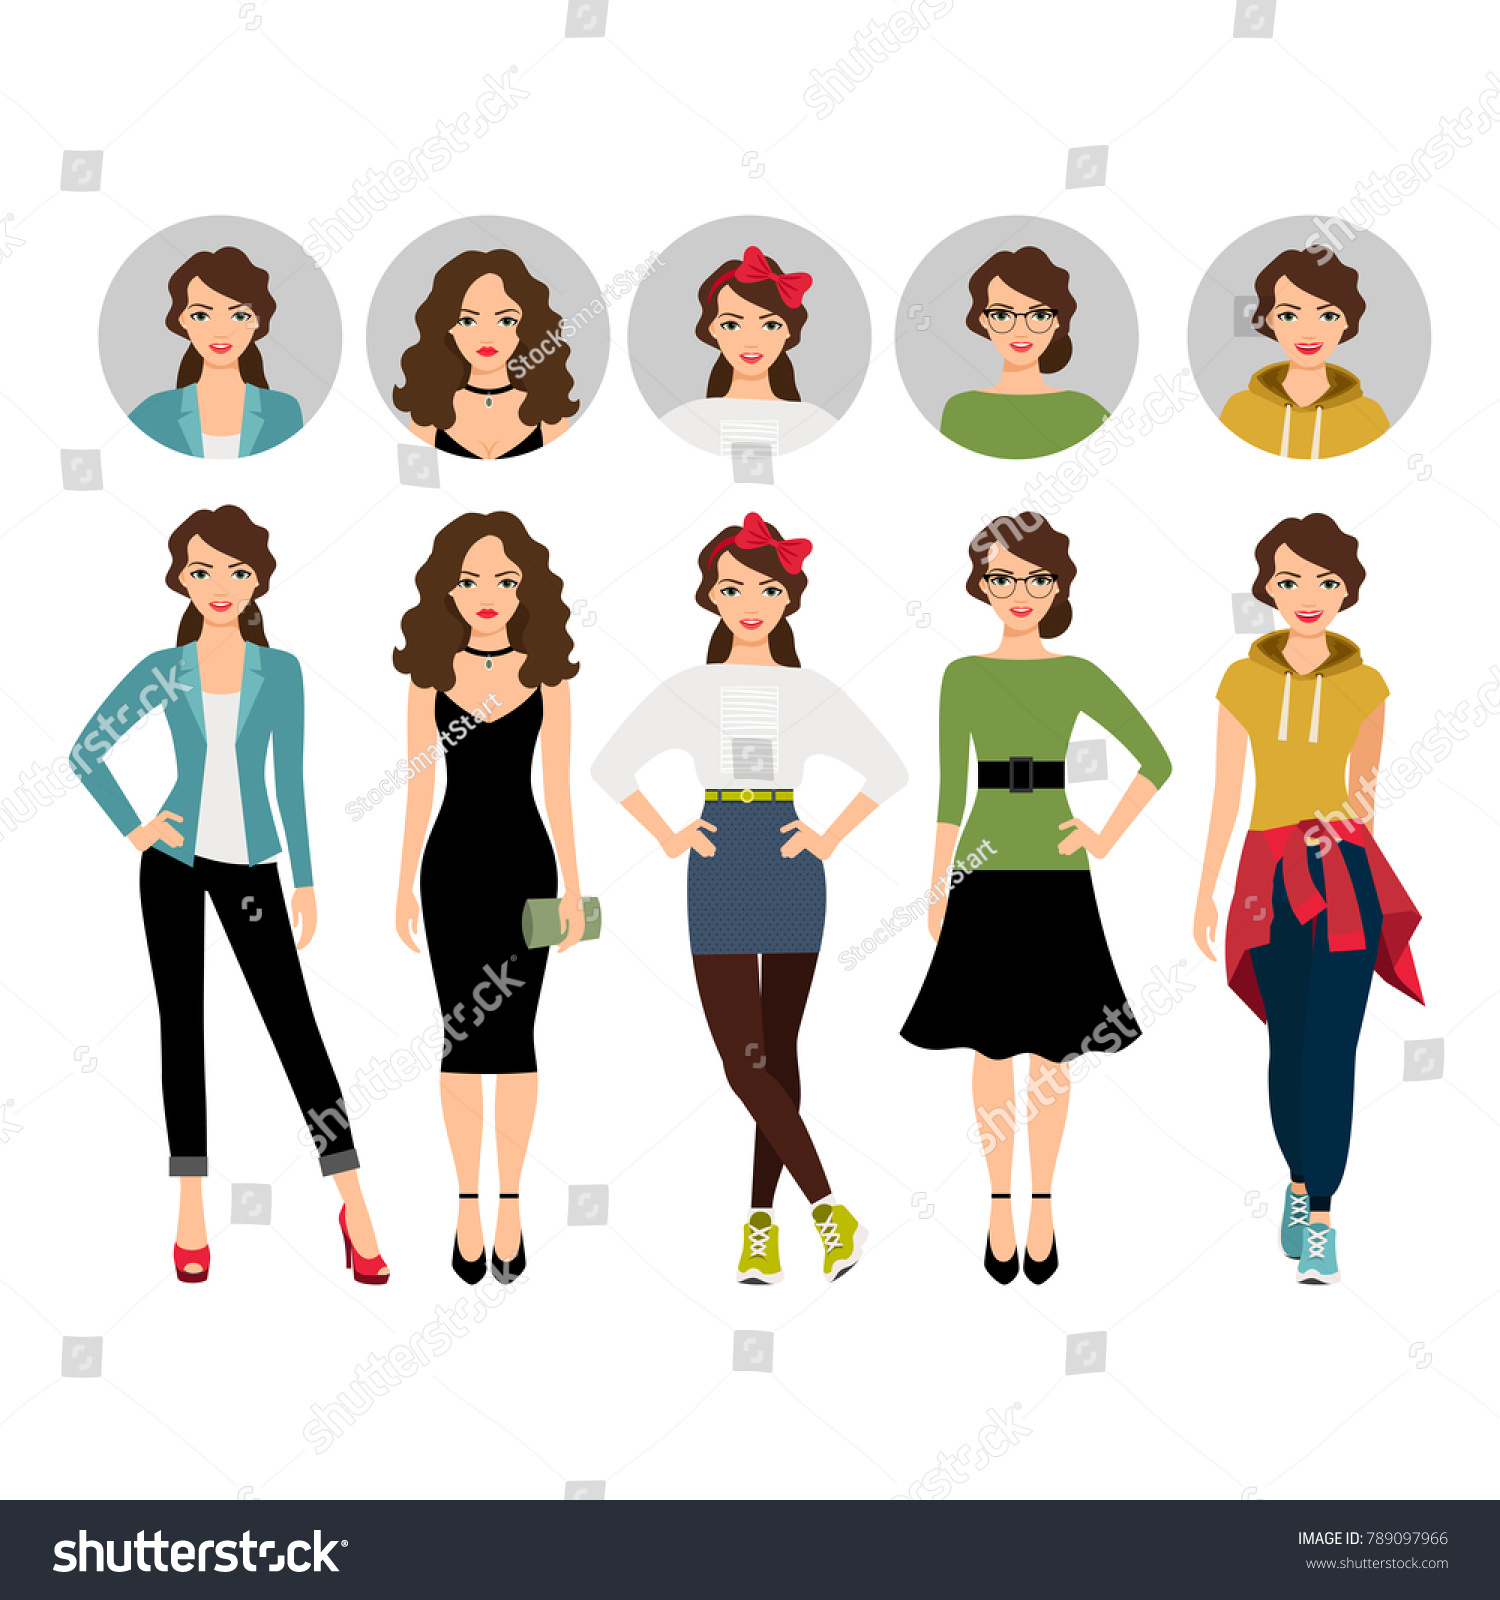 Female Model Casual Teenage Business Clothes Stock Illustration 789097966 |  Shutterstock